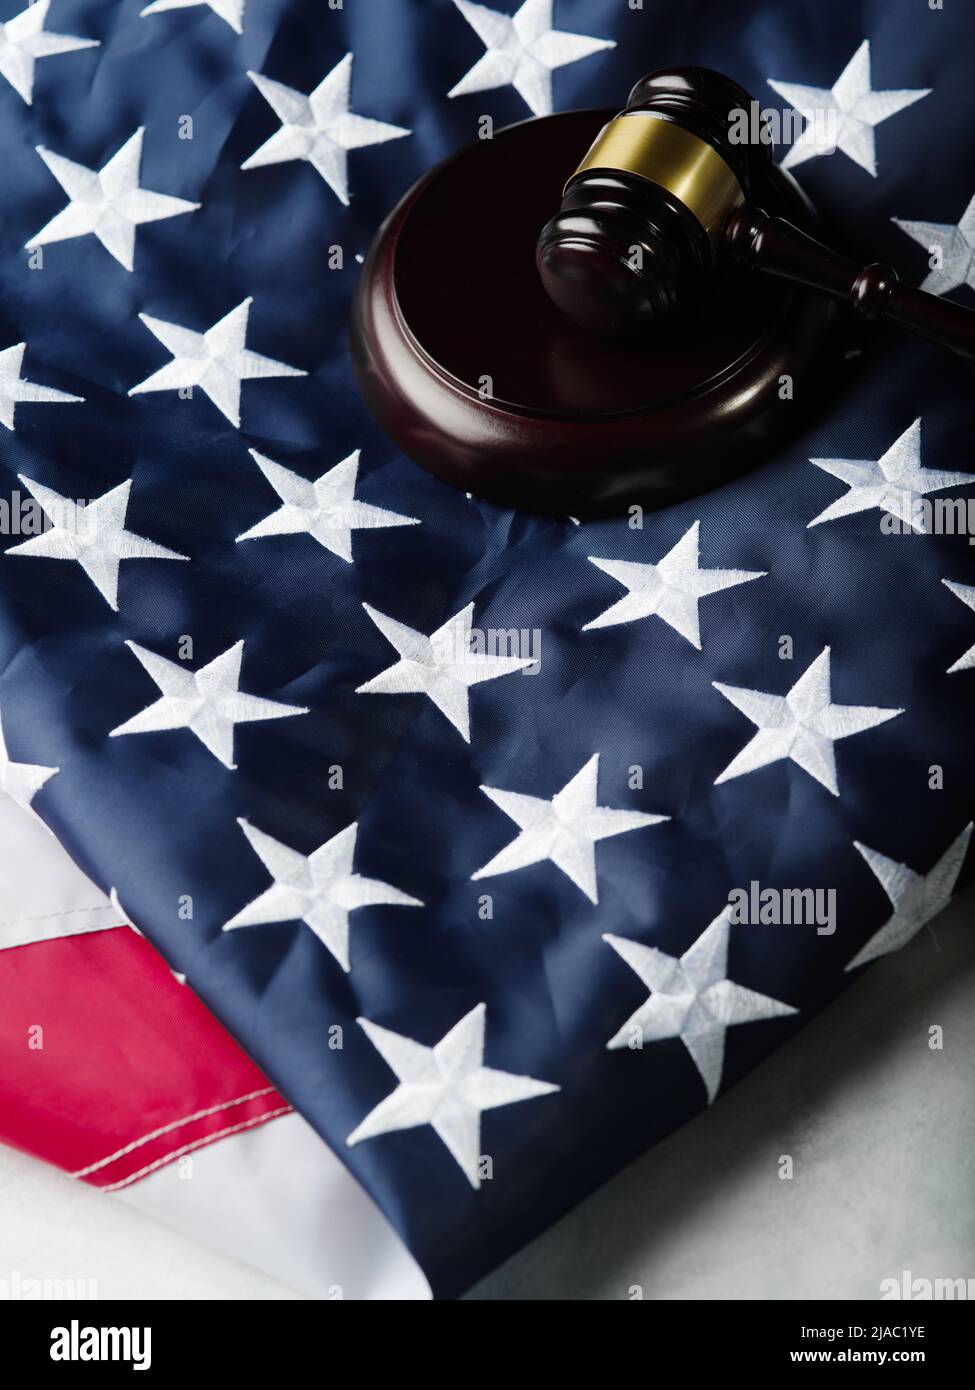 Against the background of the American flag, the judge's wooden gavel. Legitimacy, law, justice, judicial system, constitution, law. There are no peop Stock Photo